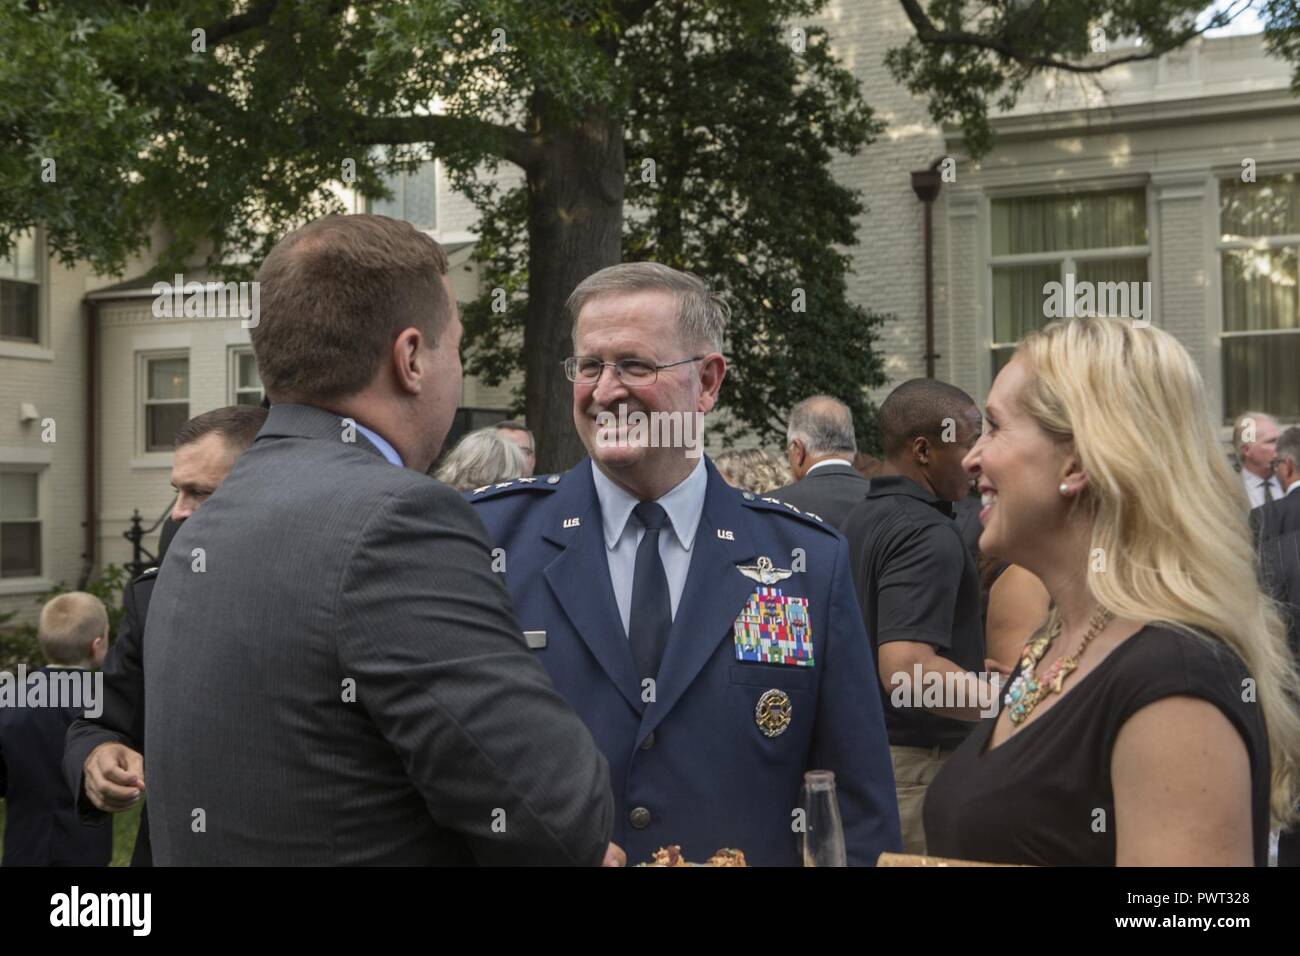 U.S. Air Force Lt. Gen. Thomas J. Trask, vice commander of Headquarters U.S. Special Operations Command (SOCOM), speaks with guests during a reception before an evening parade at Marine Barracks Washington, Washington, D.C., June 23, 2017. Evening parades are held as a means of honoring senior officials, distinguished citizens and supporters of the Marine Corps. Stock Photo